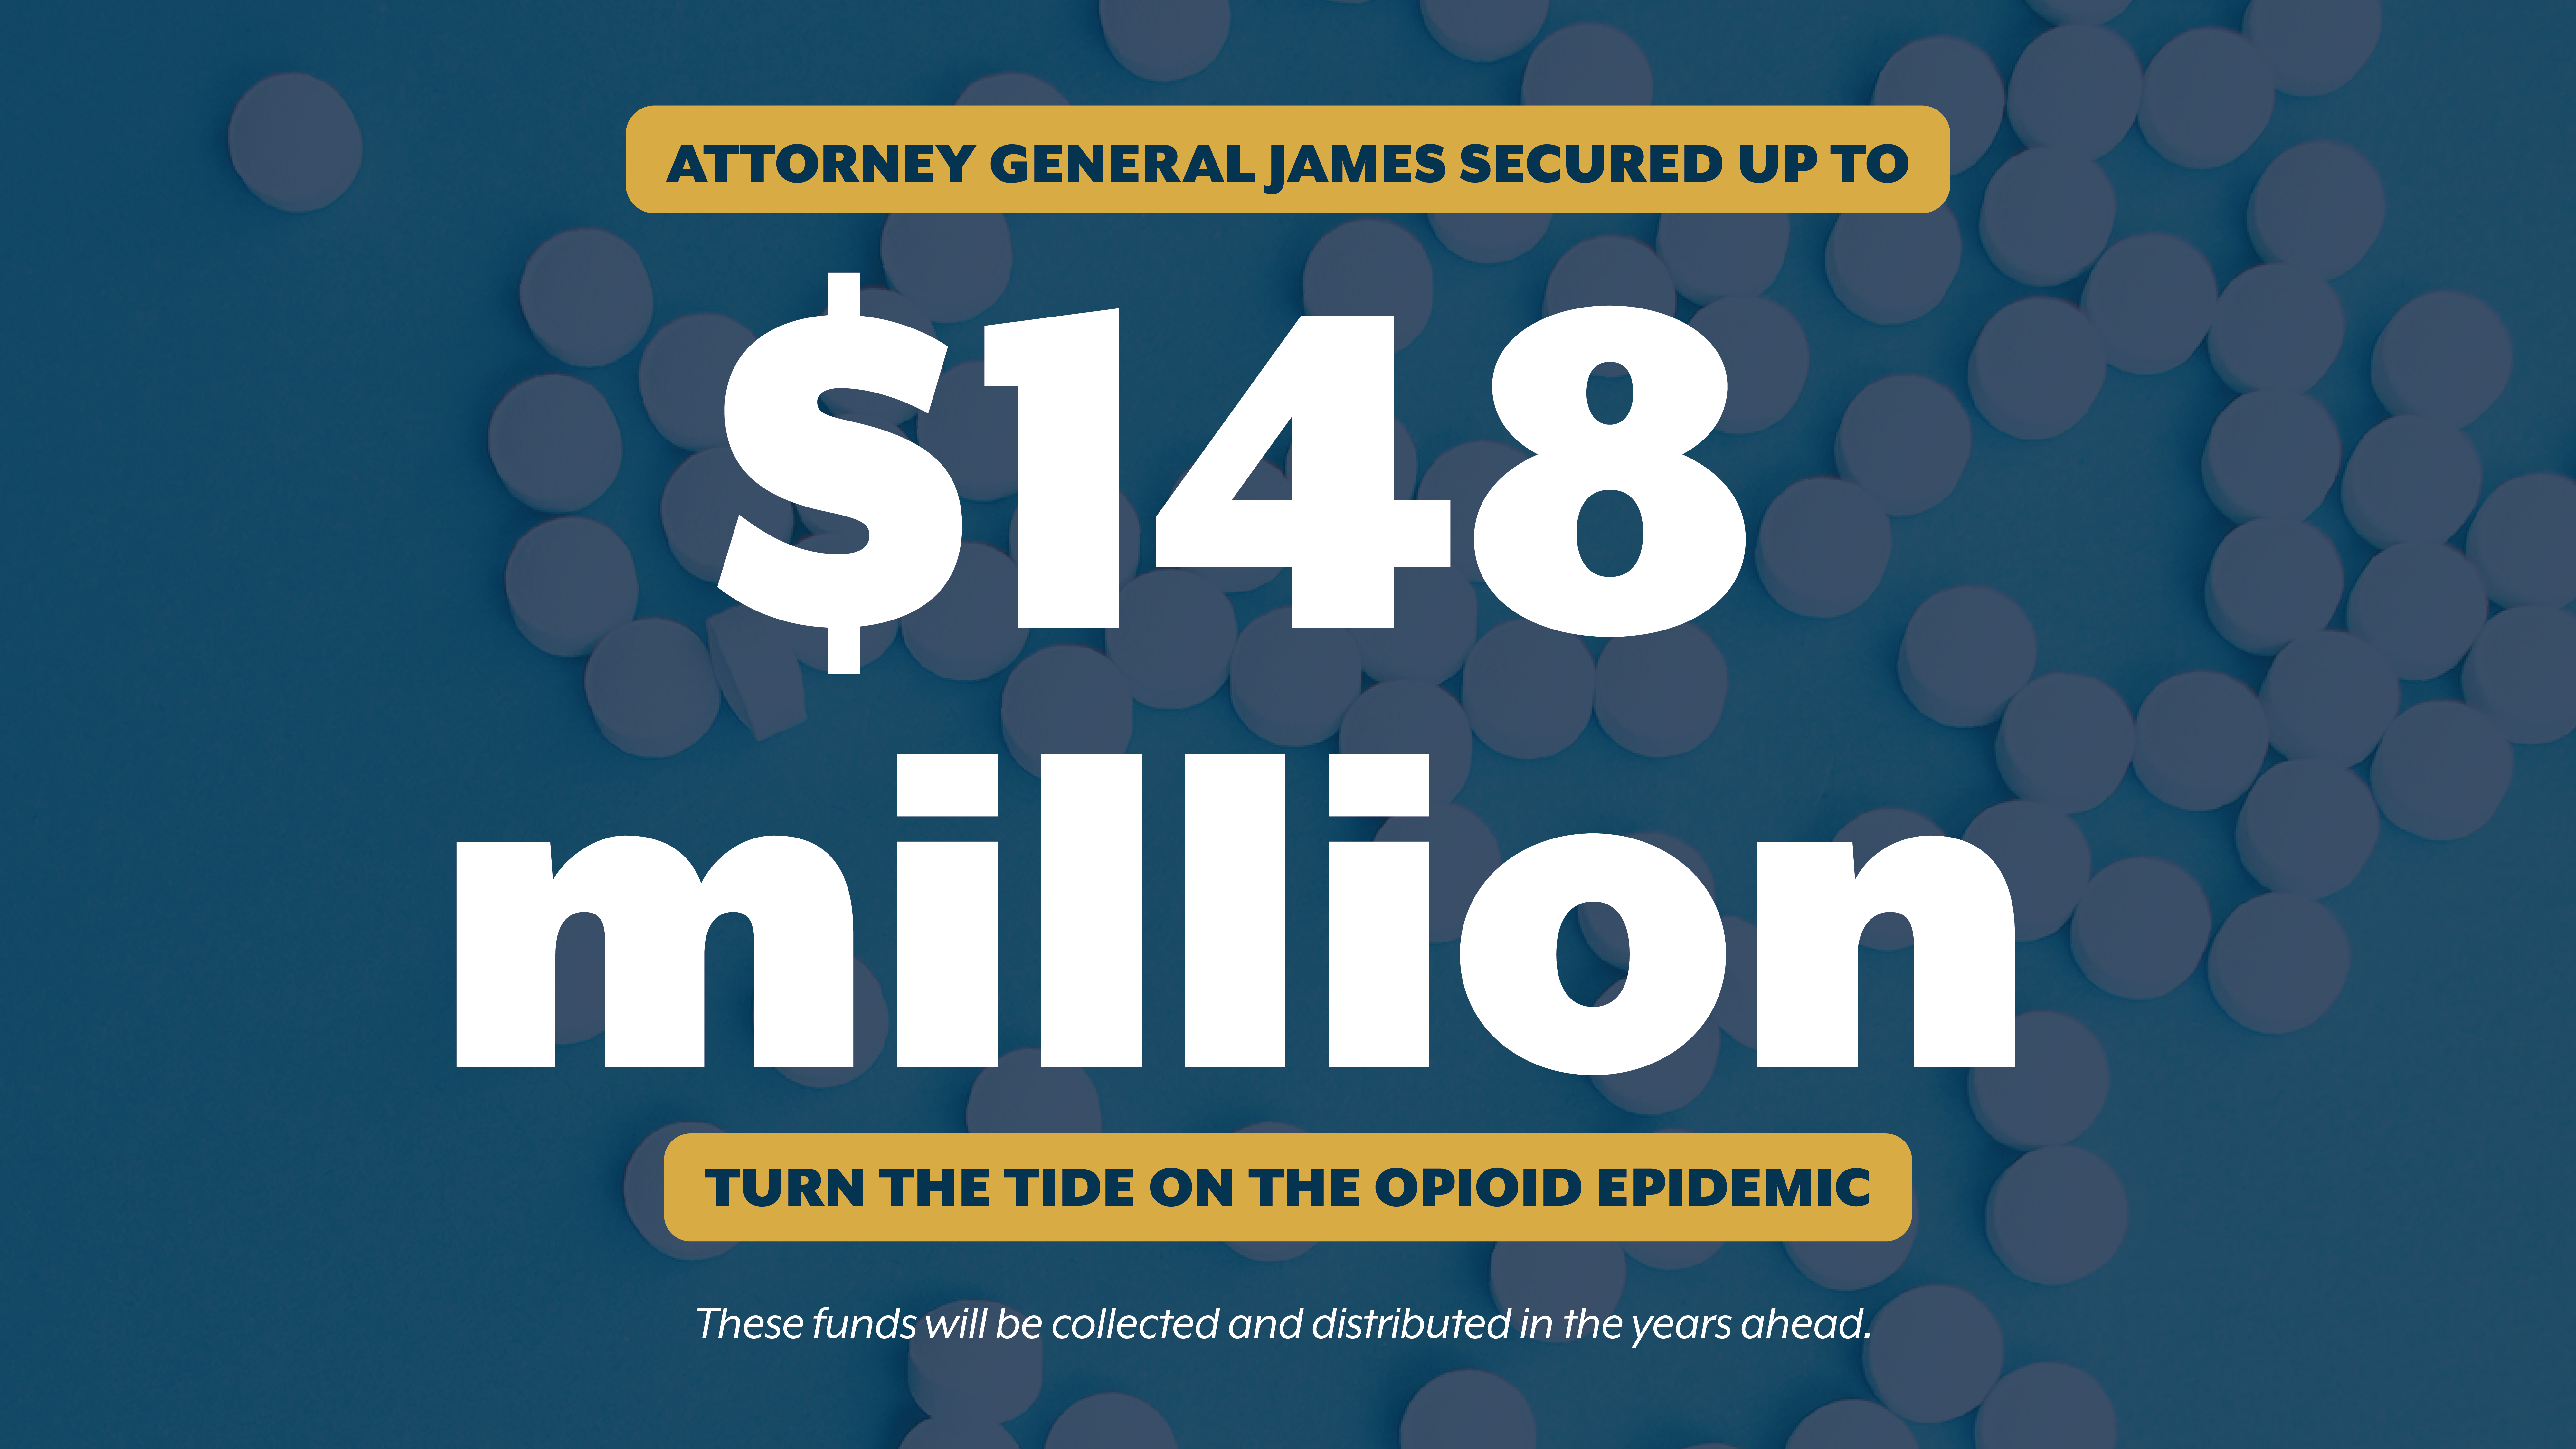 Secured up to $148M turn the tide on the opioid epidemic